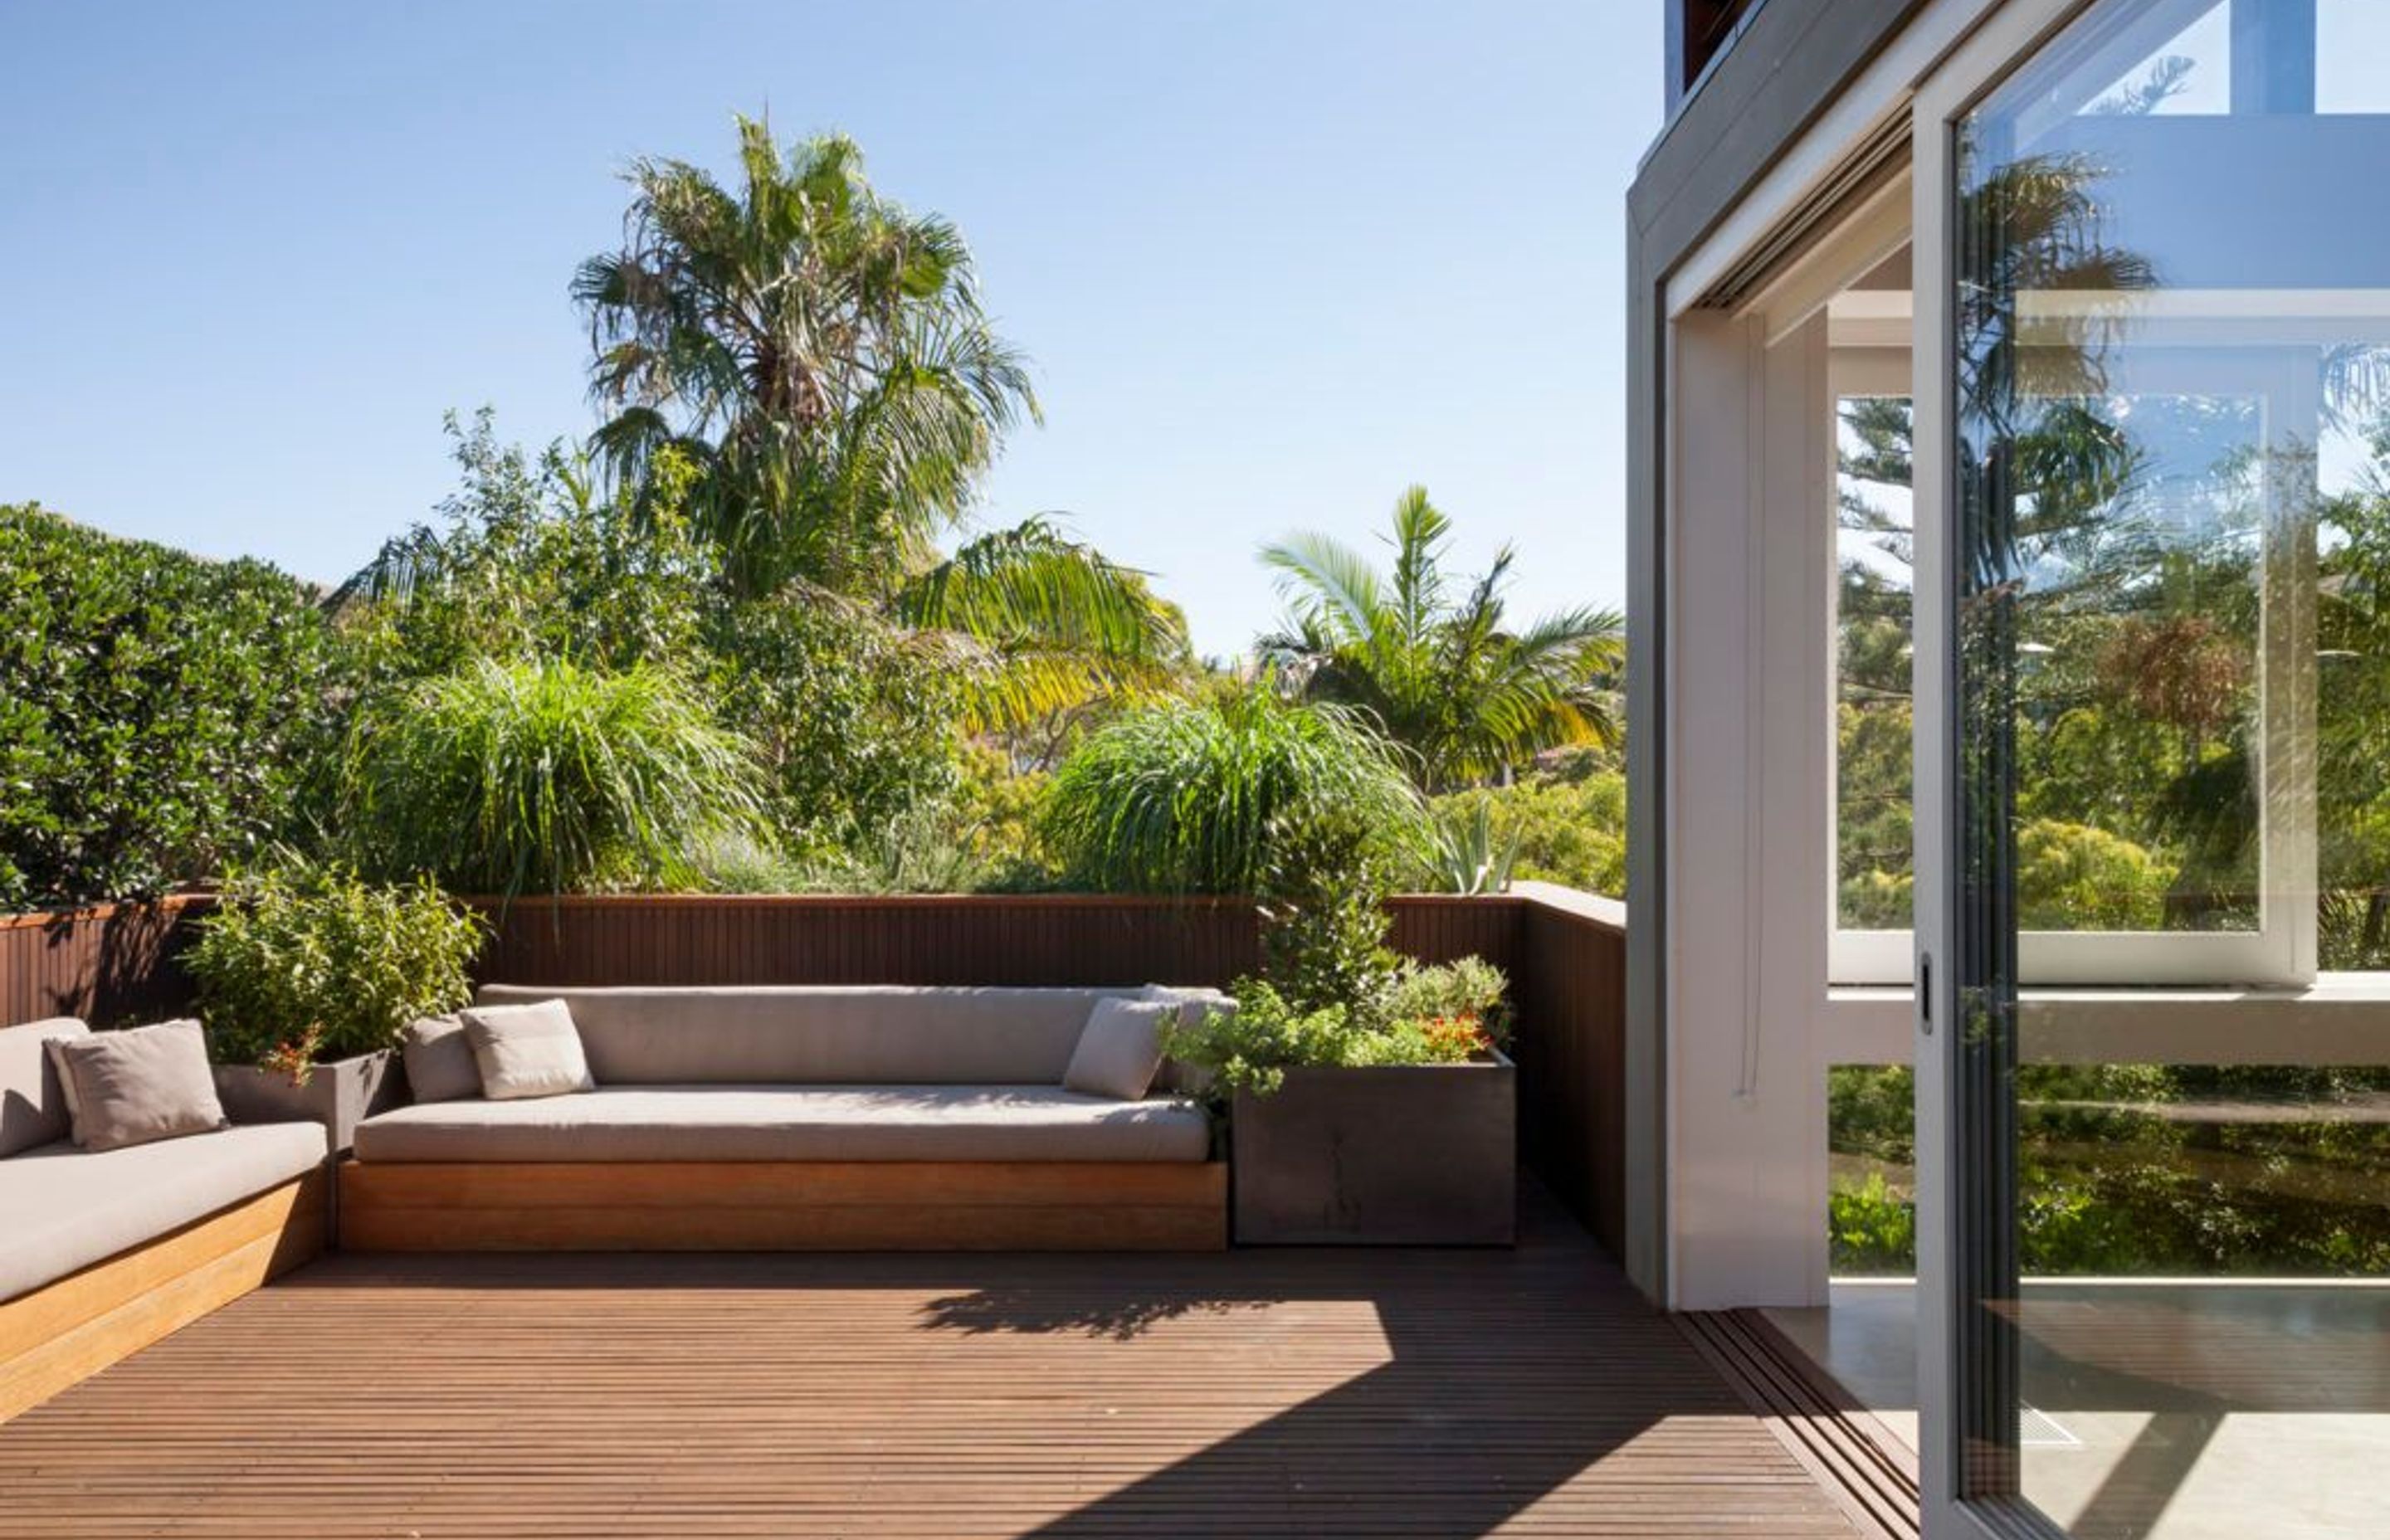 Large square lightweight pots on this balcony are filled with edible plants – the Parsley Bay garden – Pepo Botanic Design.